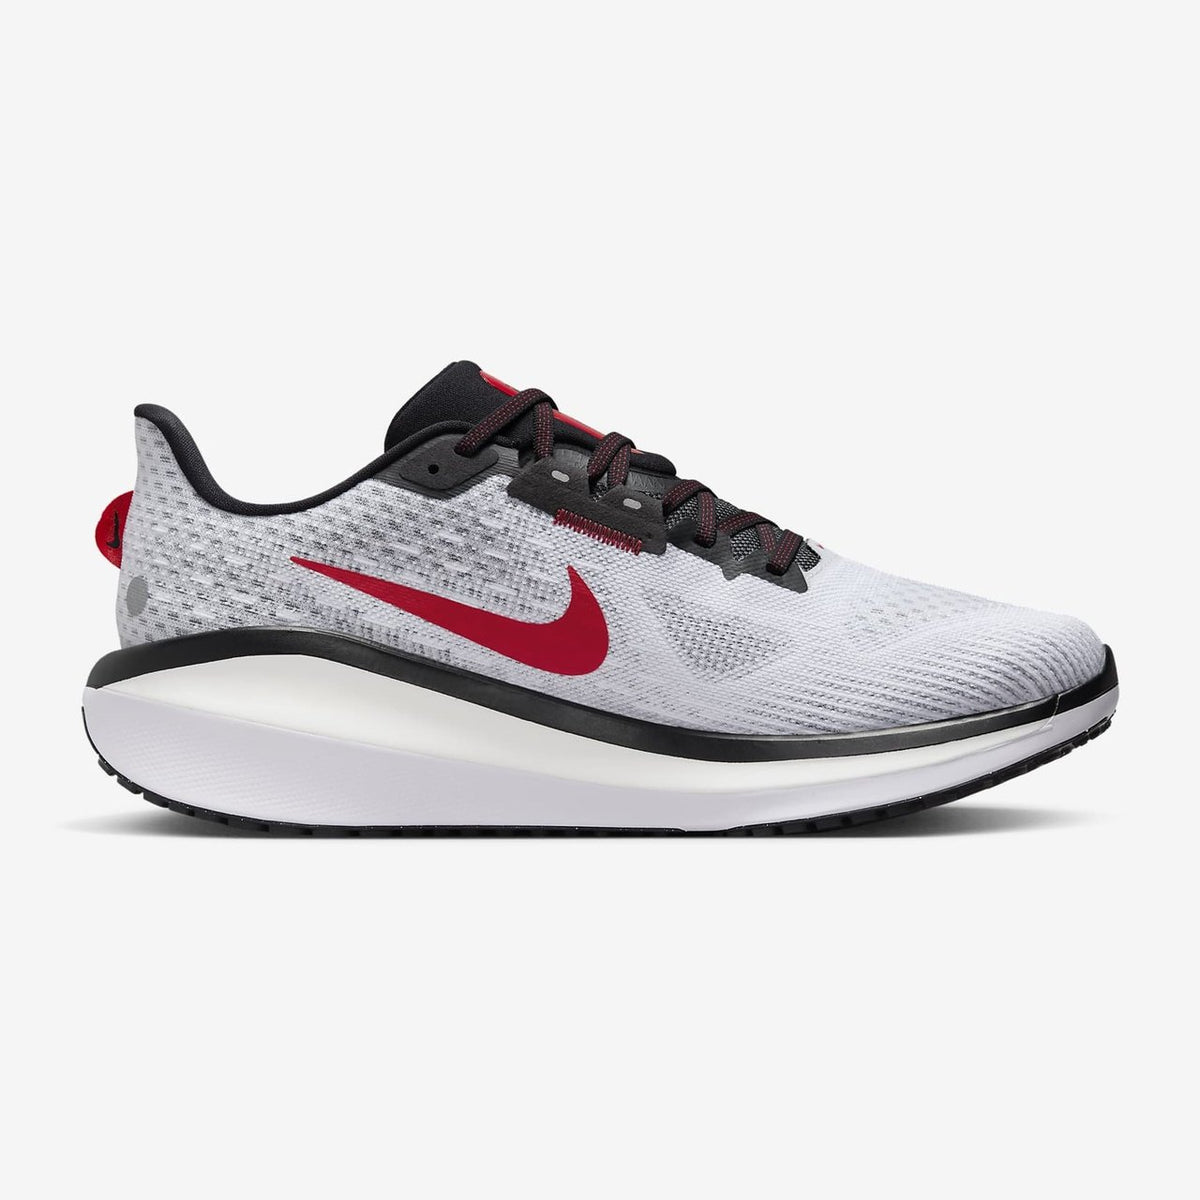 Nike Vomero 17 Mens FOOTWEAR - Mens Neutral Cushioned WHITE/BLACK/FIRE RED